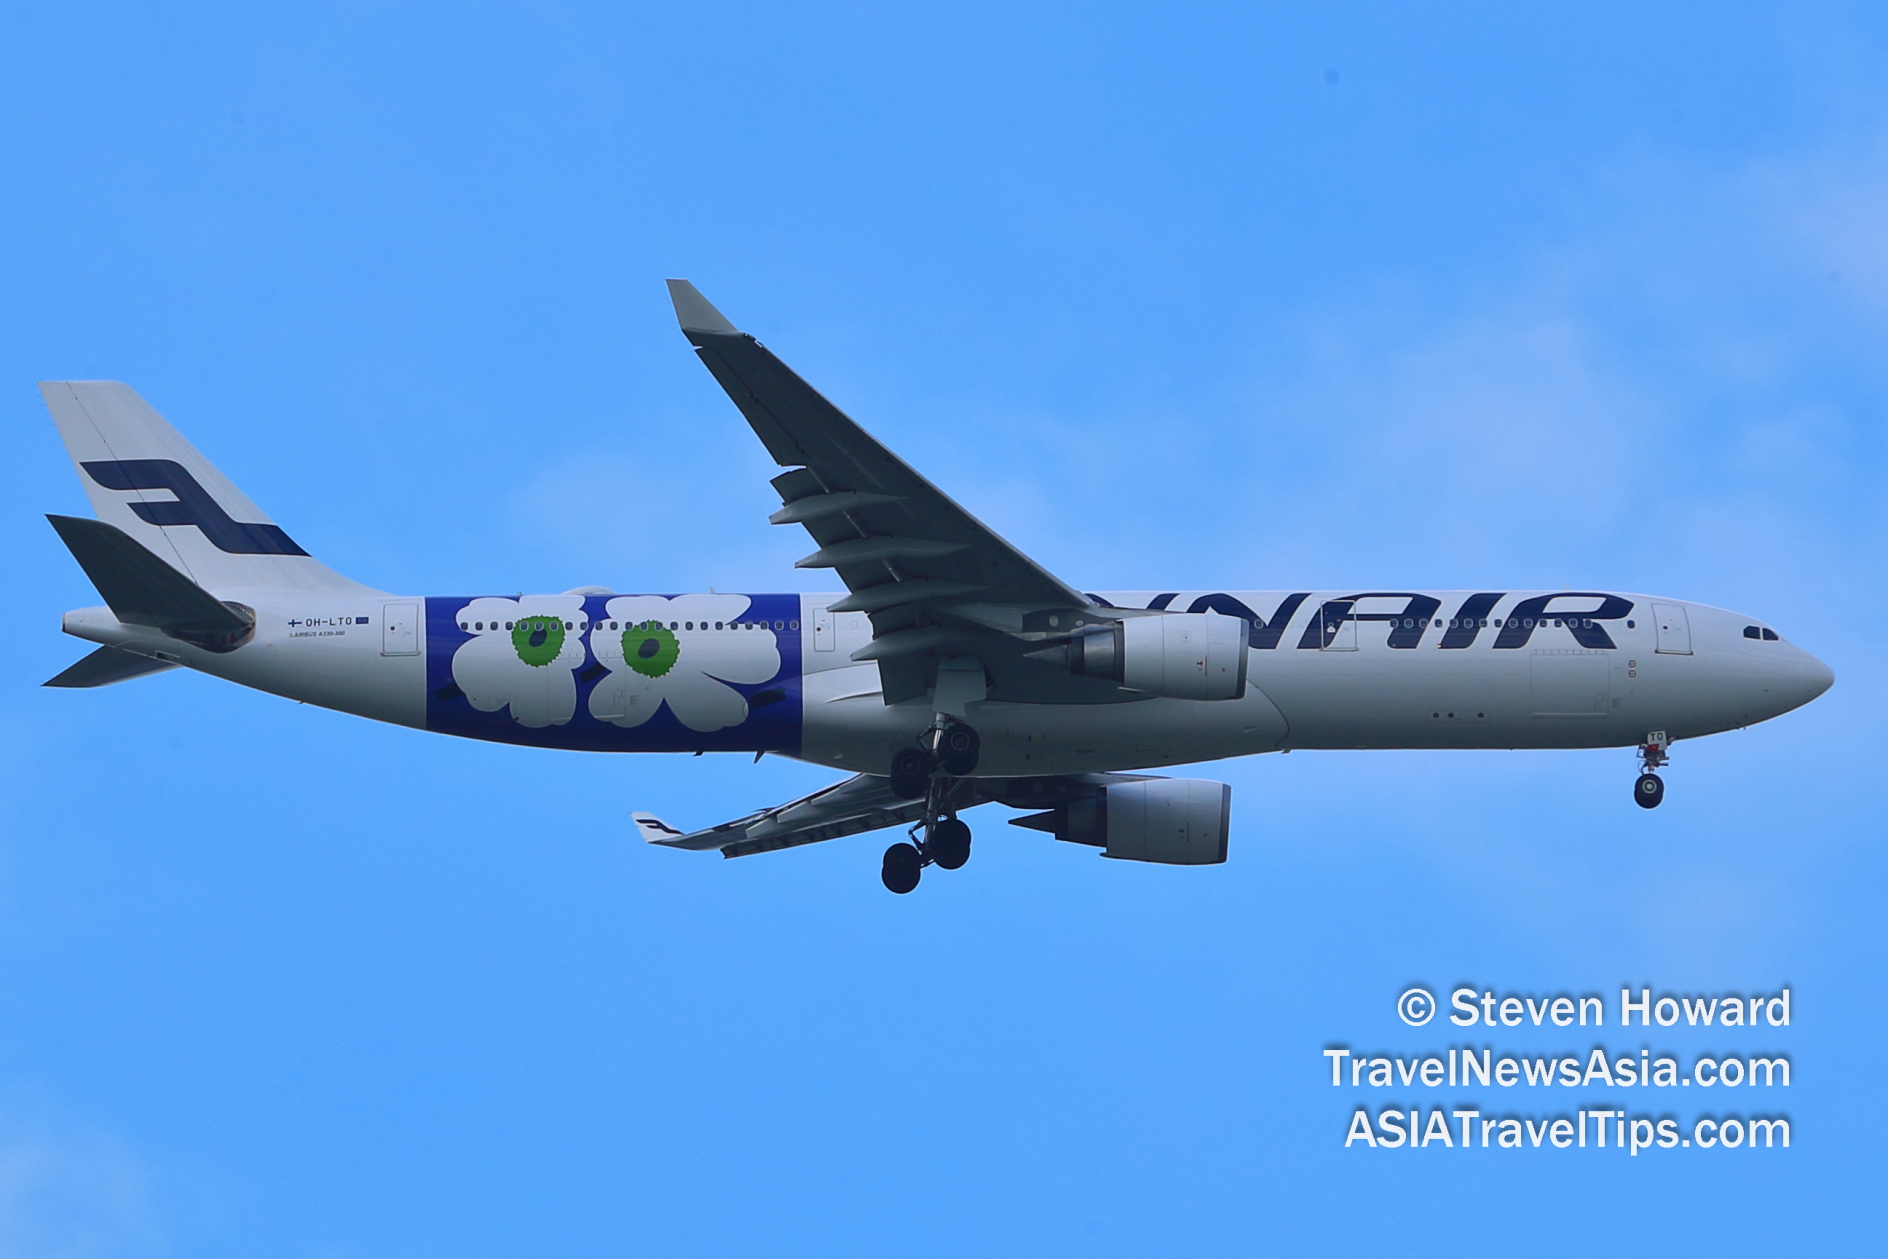 Finnair A330 reg: OH-LTO. Picture by Steven Howard of TravelNewsAsia.com Click to enlarge.